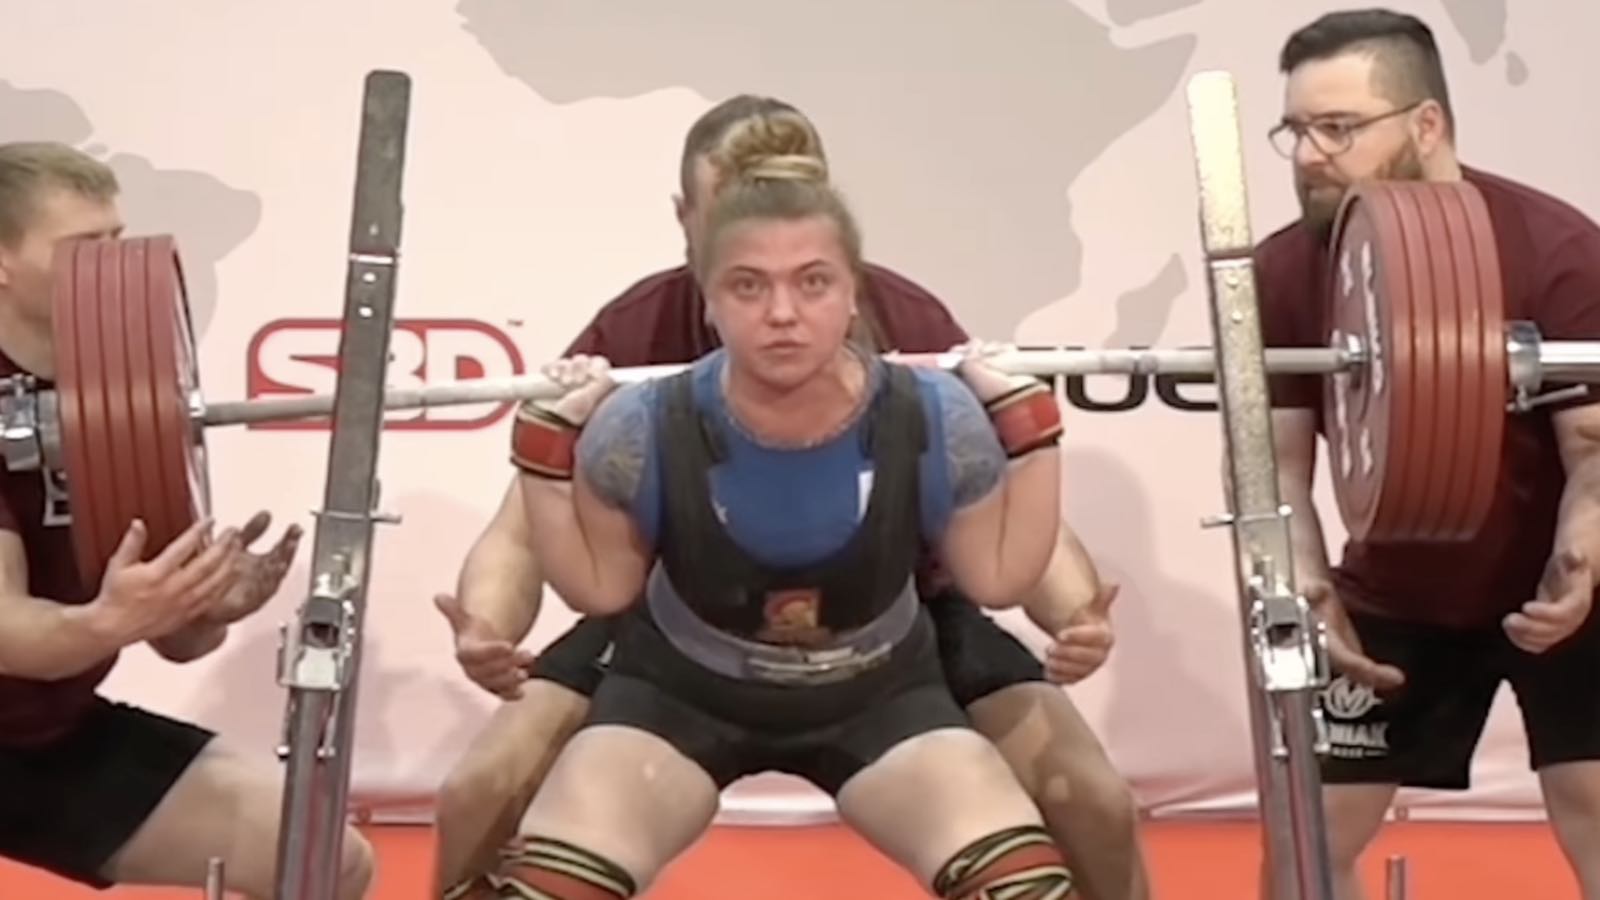 daria-rusanenko-(84kg)-scores-equipped-squat-world-record-of-276-kilograms-(608.4-pounds)-–-breaking-muscle